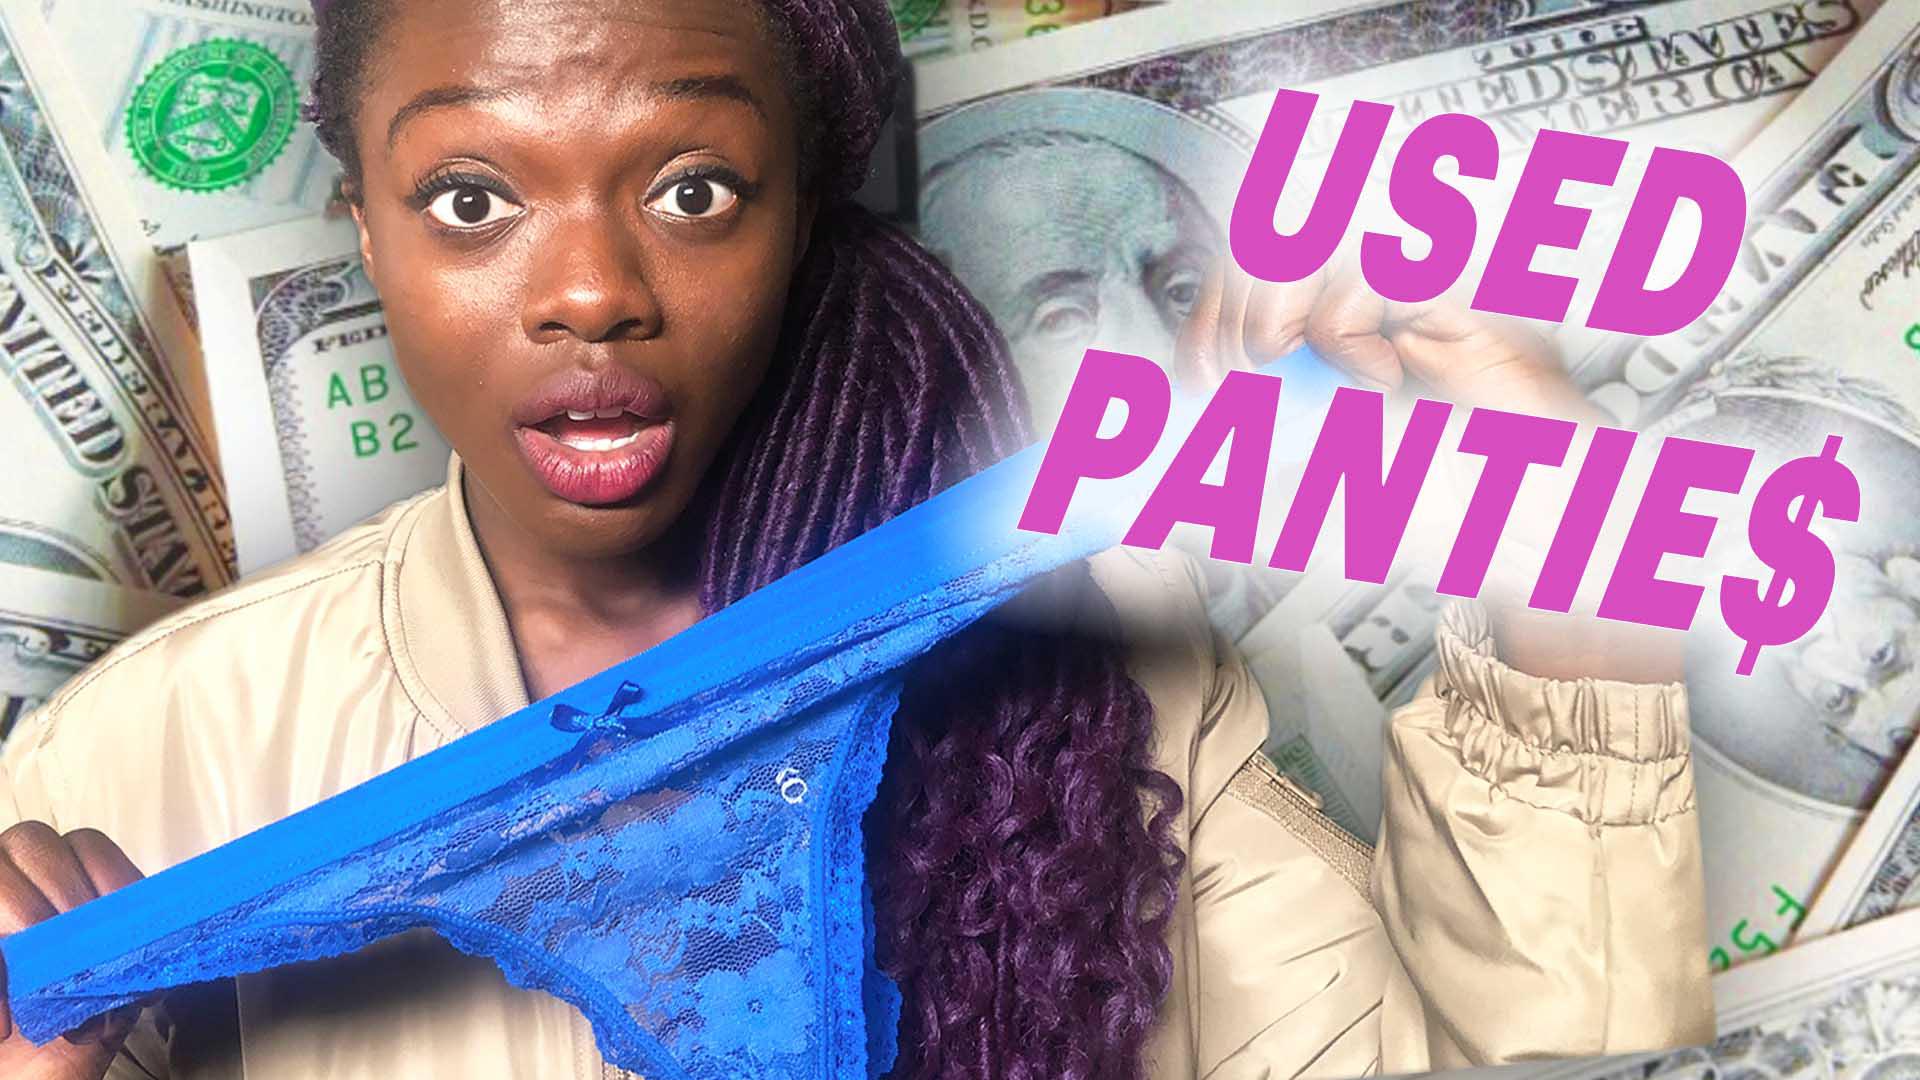 Watch: I Tried To Sell My Used Panties Online.